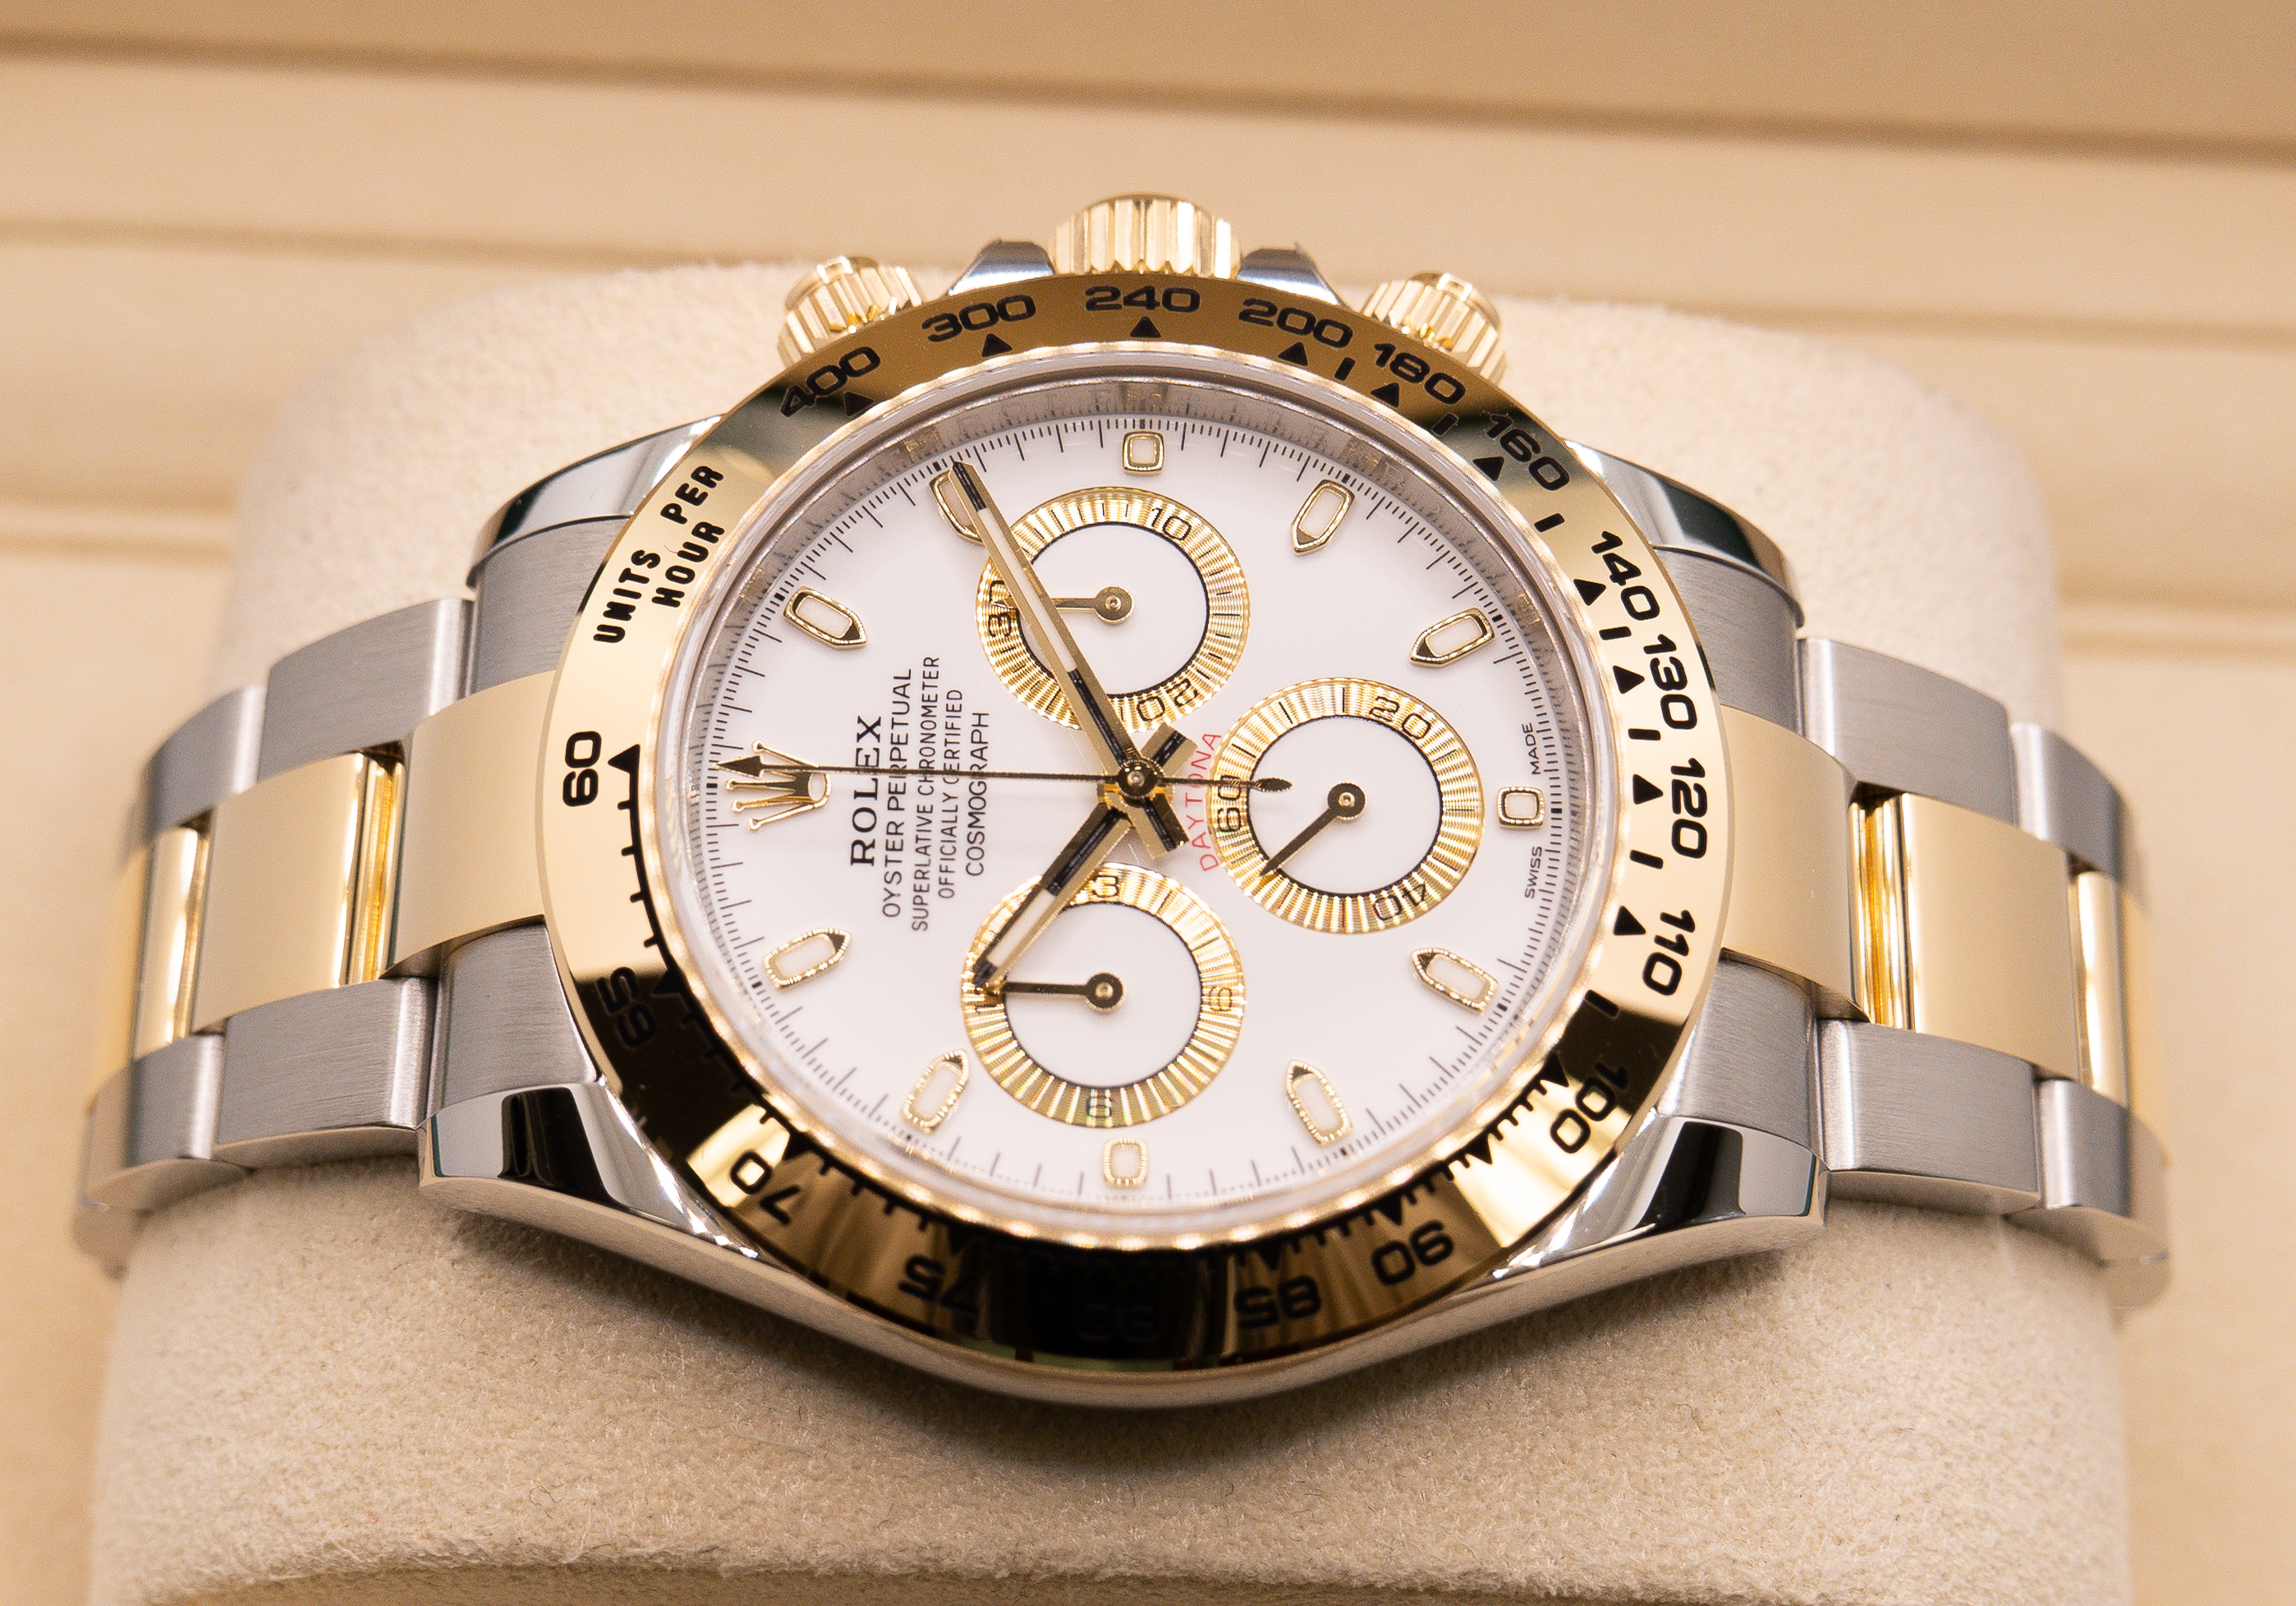 Pre-Owned Rolex Watches Illinois